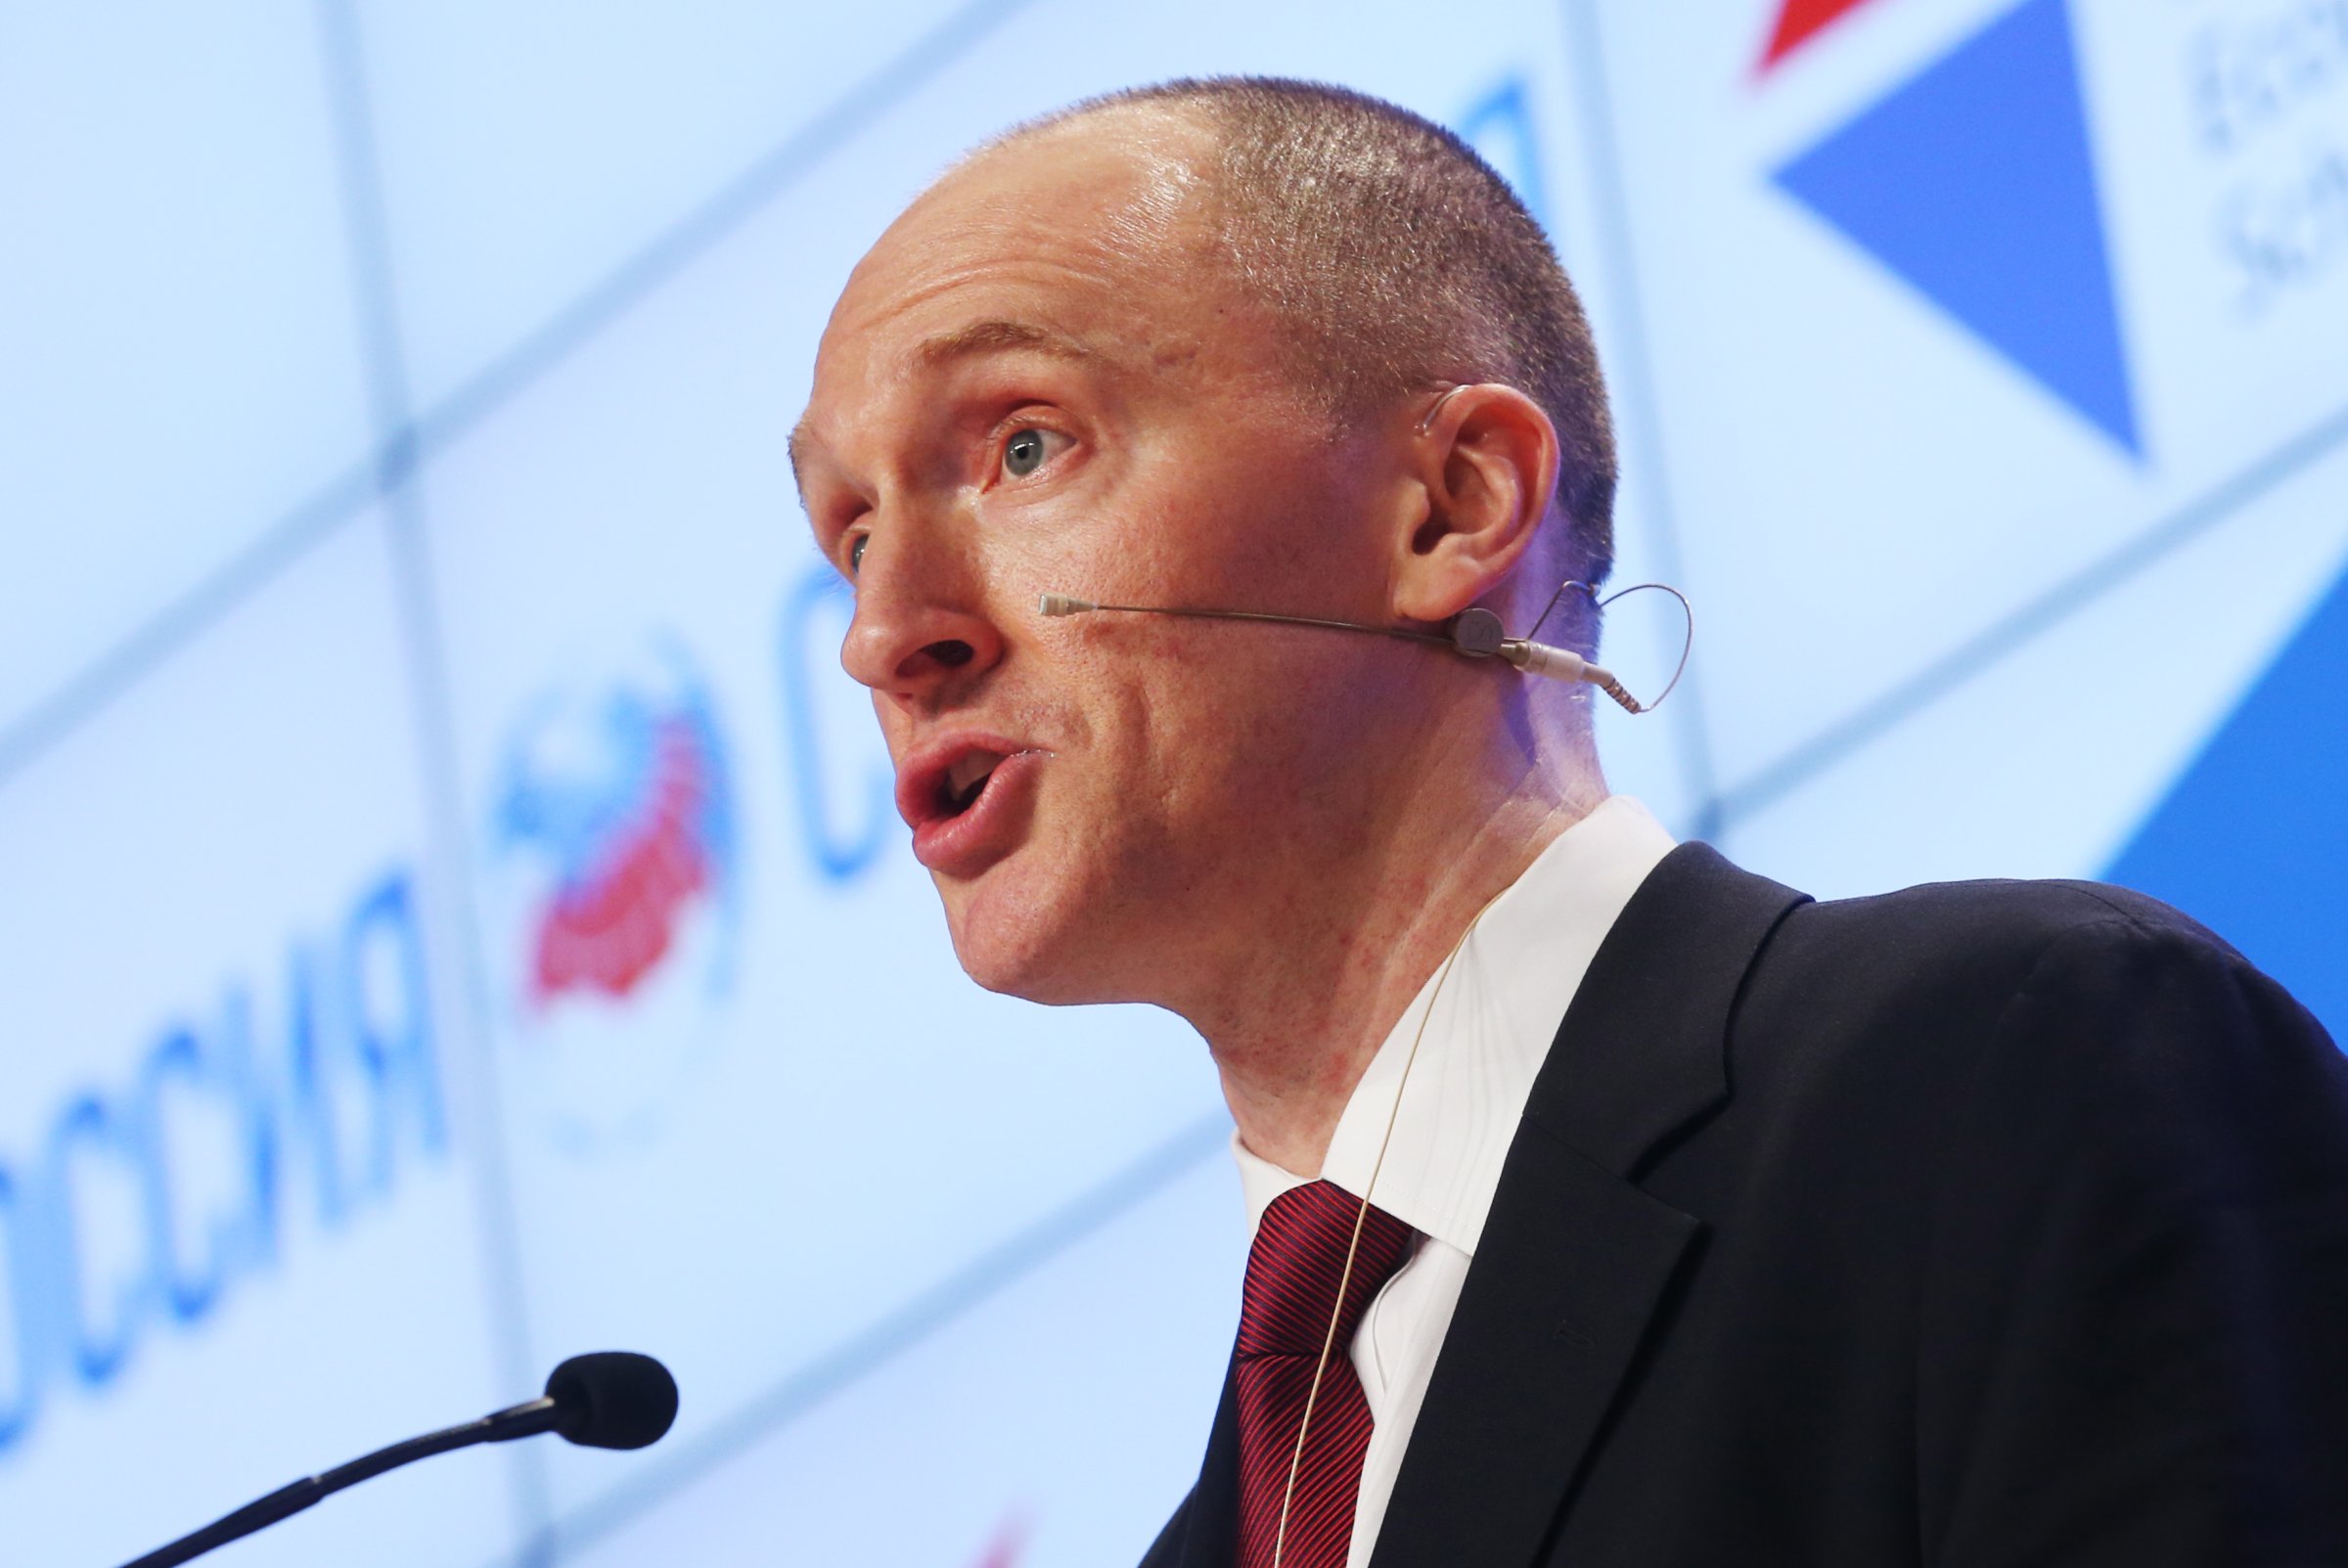 Trump's ex-adviser Carter Page gives presentation in Moscow